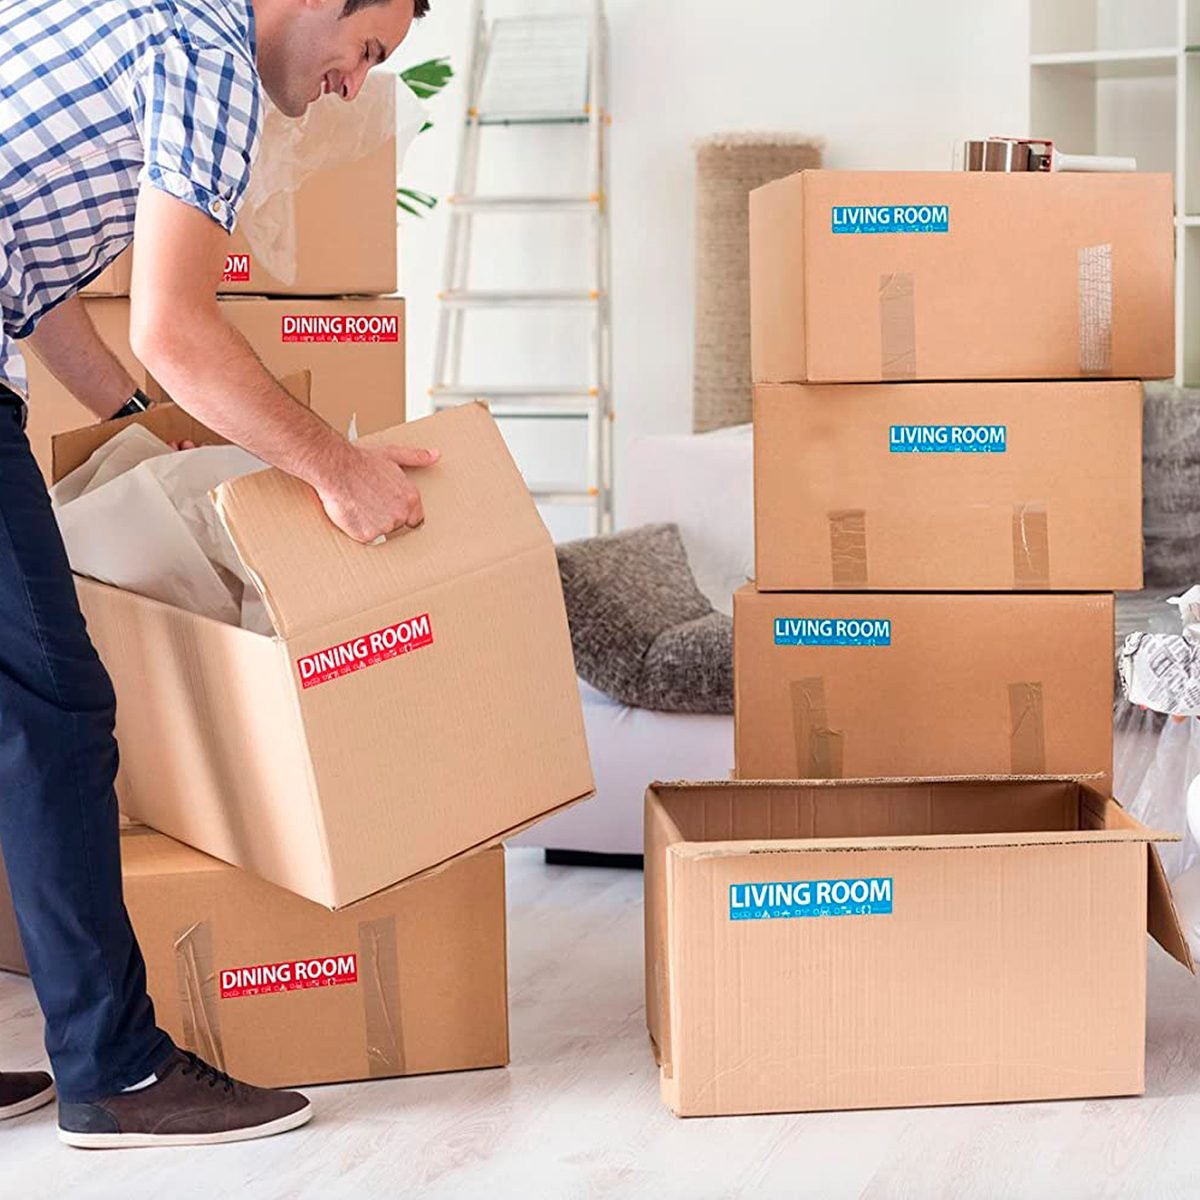 16 Moving Essentials For Every Skill Level and Occasion